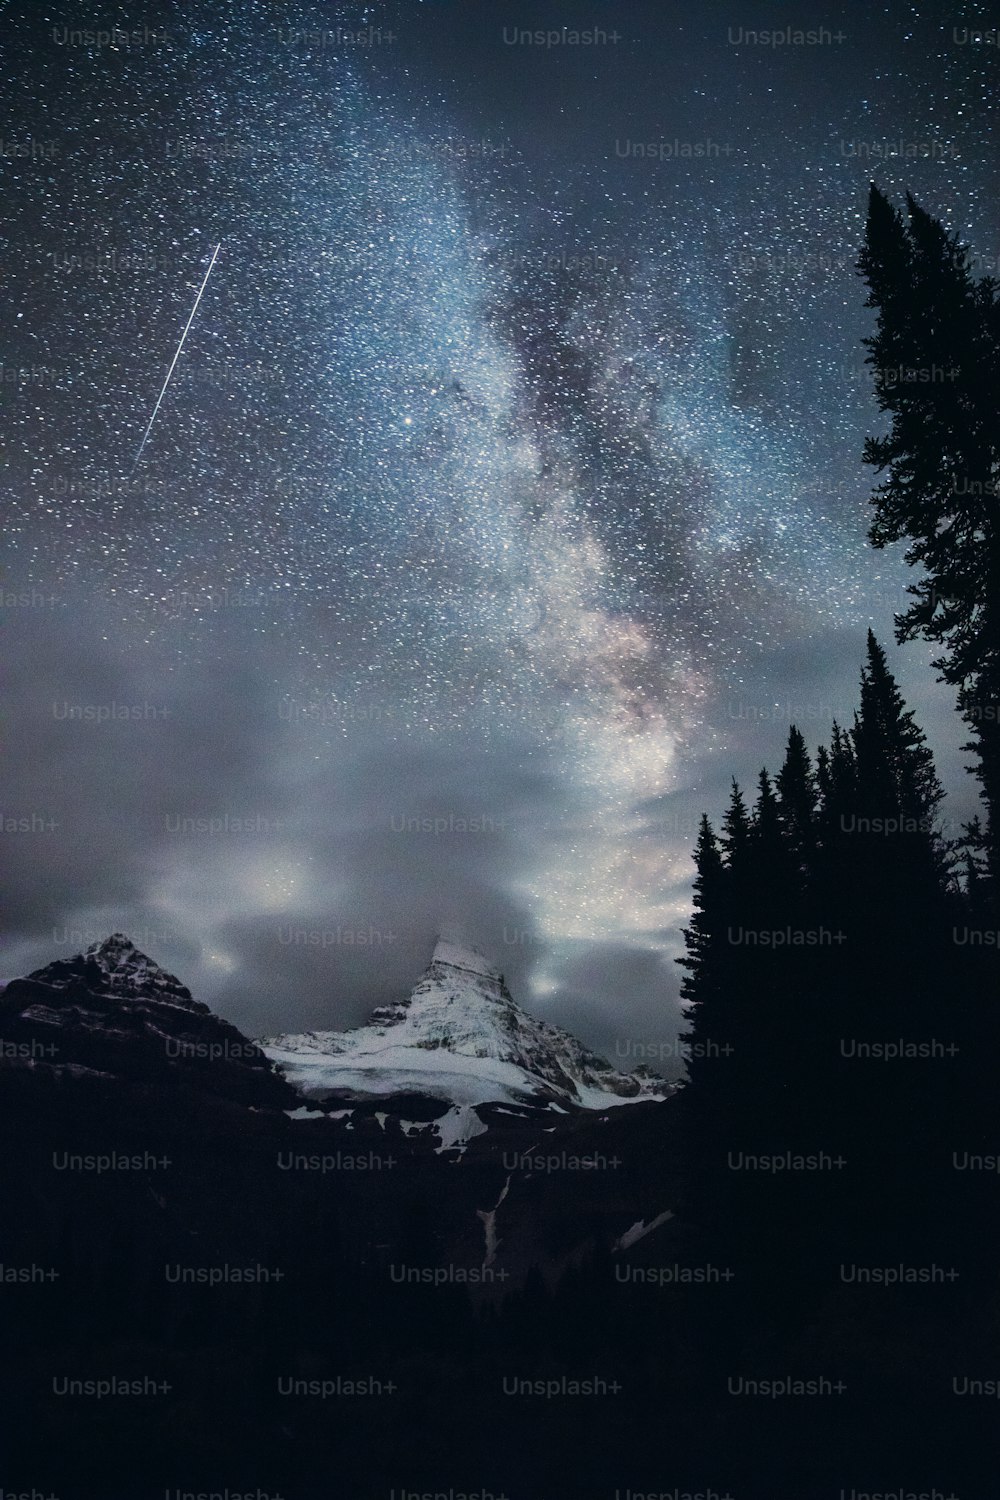 a night sky with a mountain and trees in the foreground